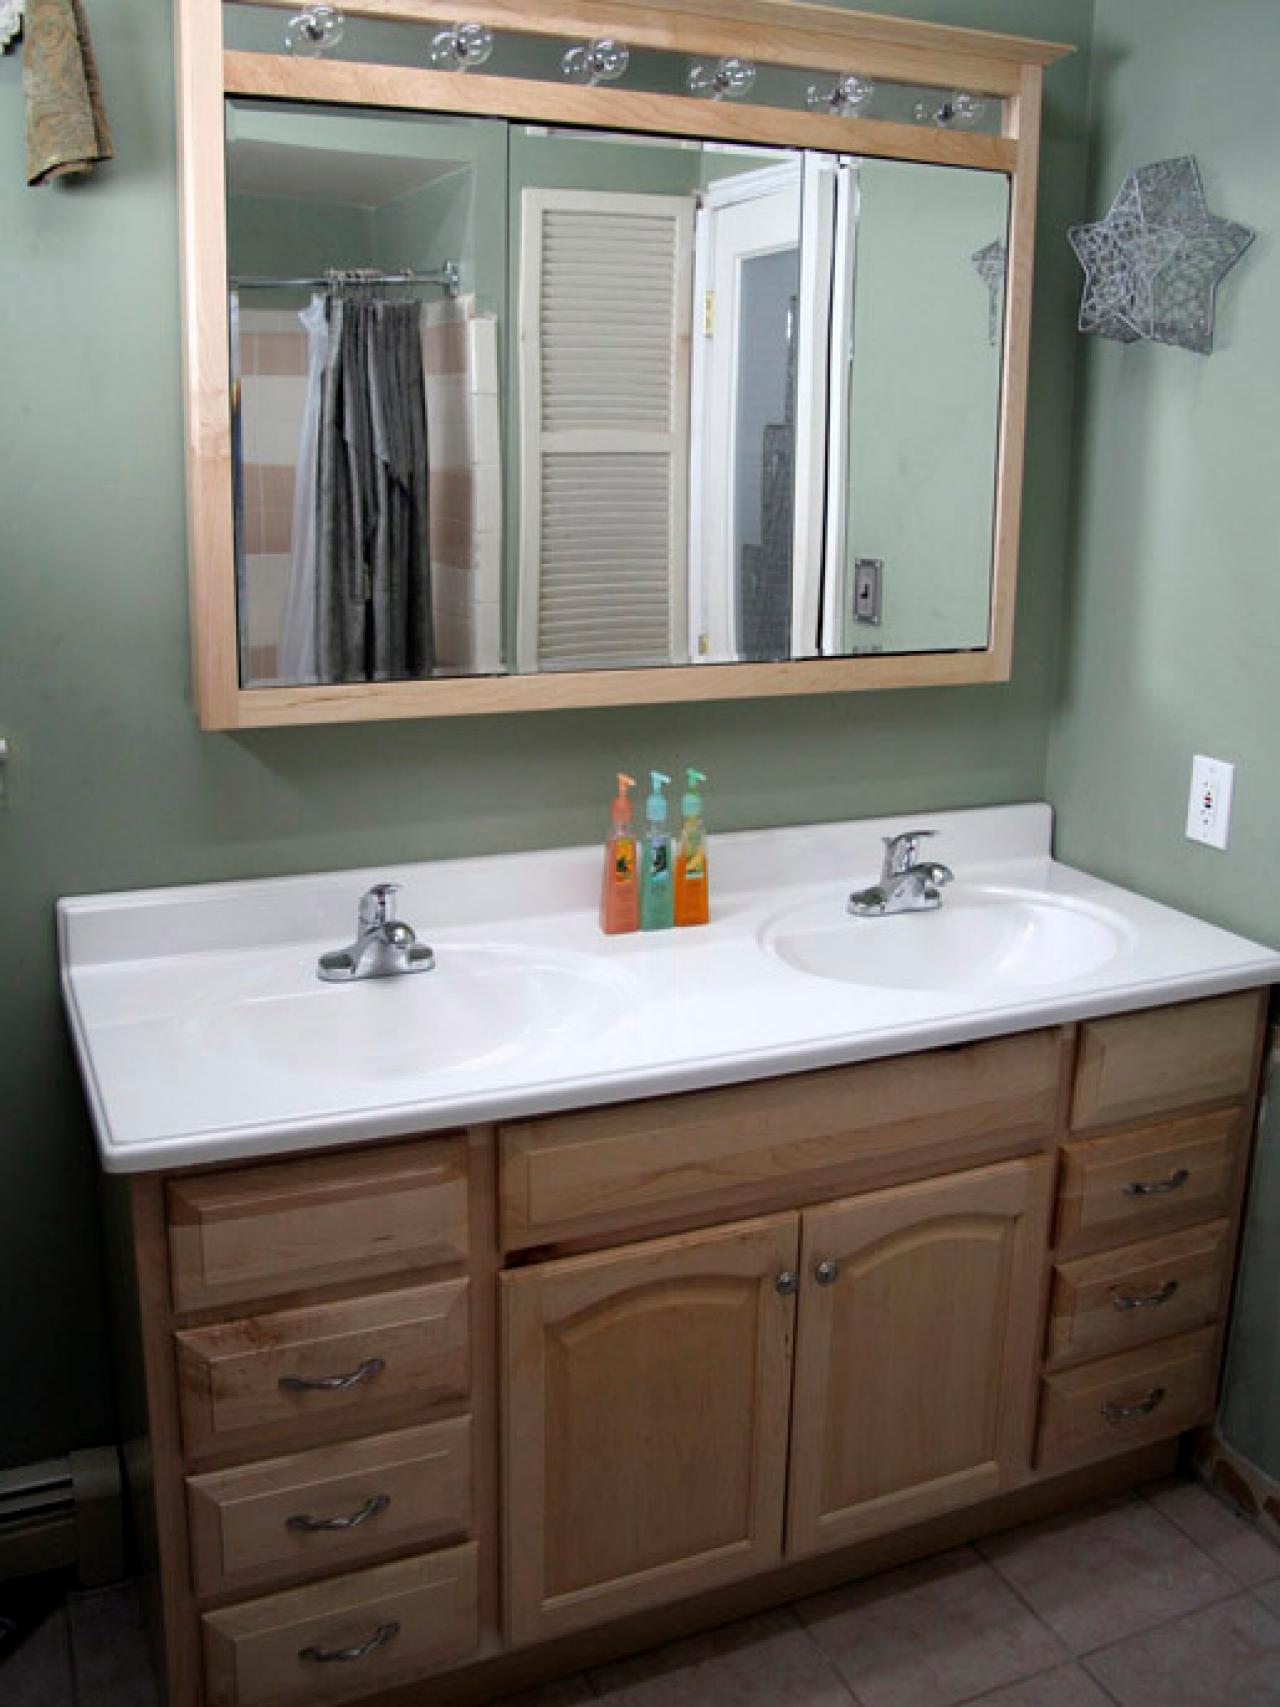 Installing A Bathroom Vanity, How Long Should A Double Vanity Be